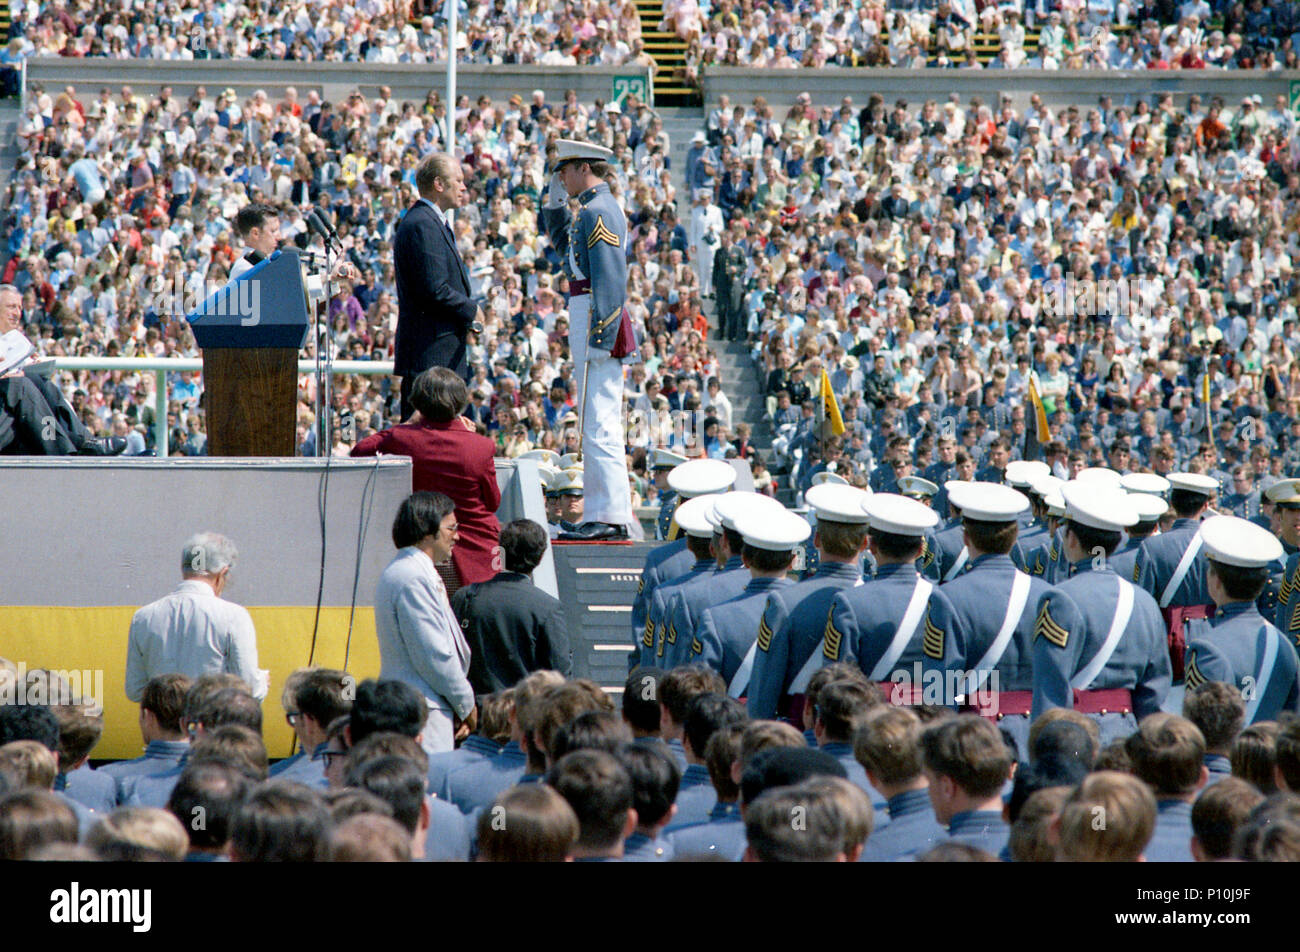 1975 June 4 – United States Military Academy – West Point, NY – Gerald R. Ford, Platform Guests, Cadets, Guests – GRF in background, handshaking; cadets in foreground walking up ramp to platform – U.S. Military Academy 1975 Commencement - West Point, New York Stock Photo